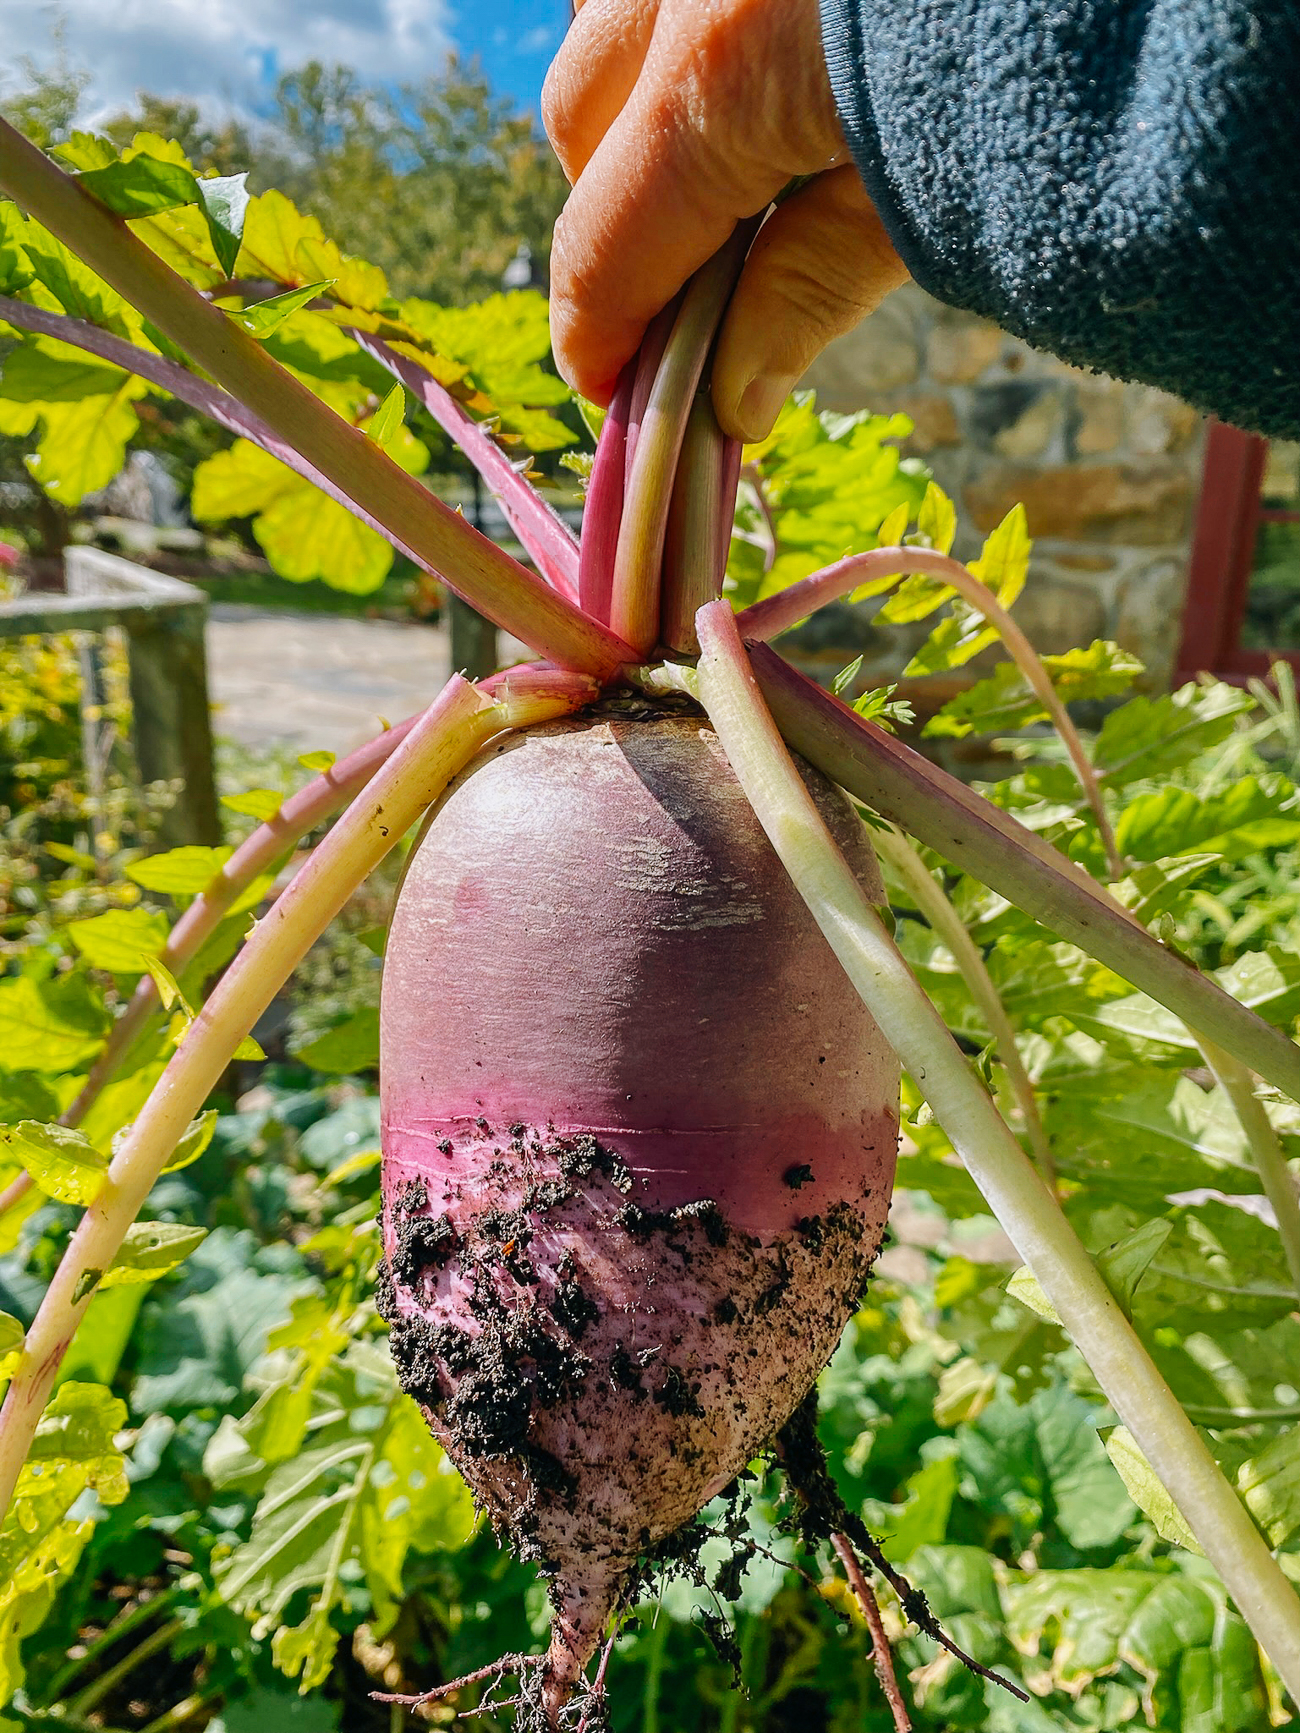 watermelon radish pulled out of ground